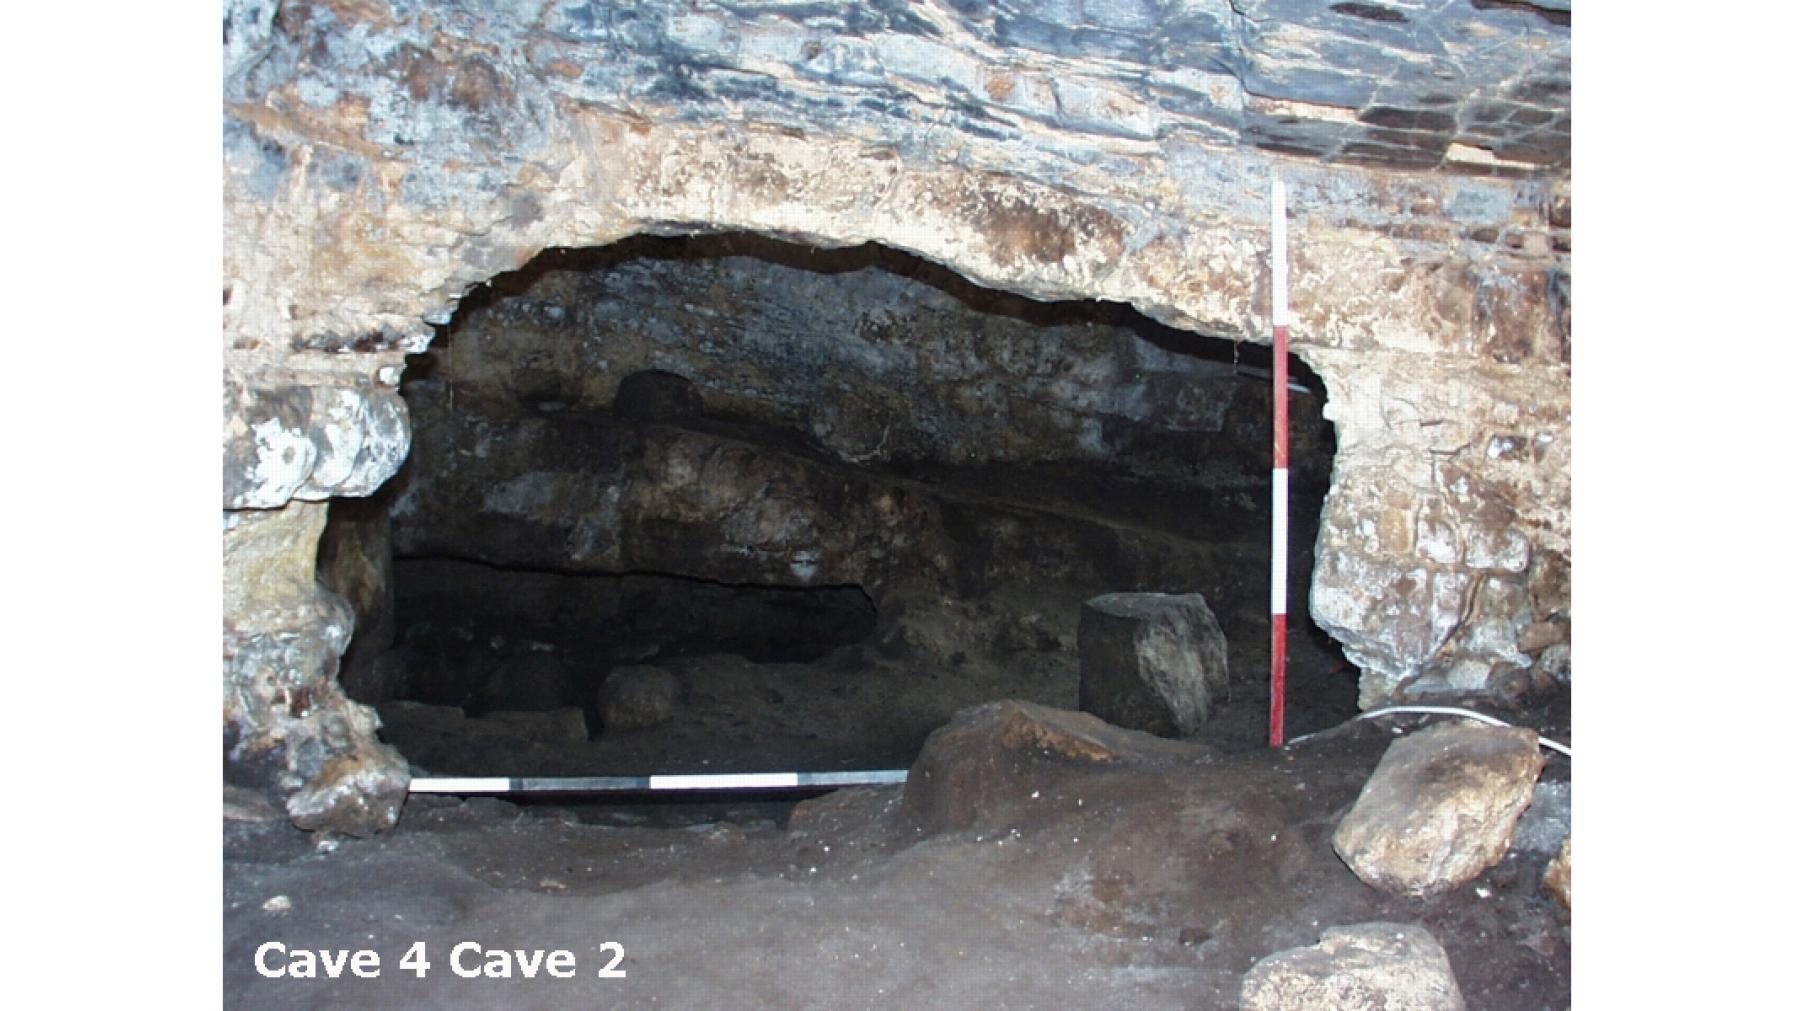 Cave 4 Cave 2